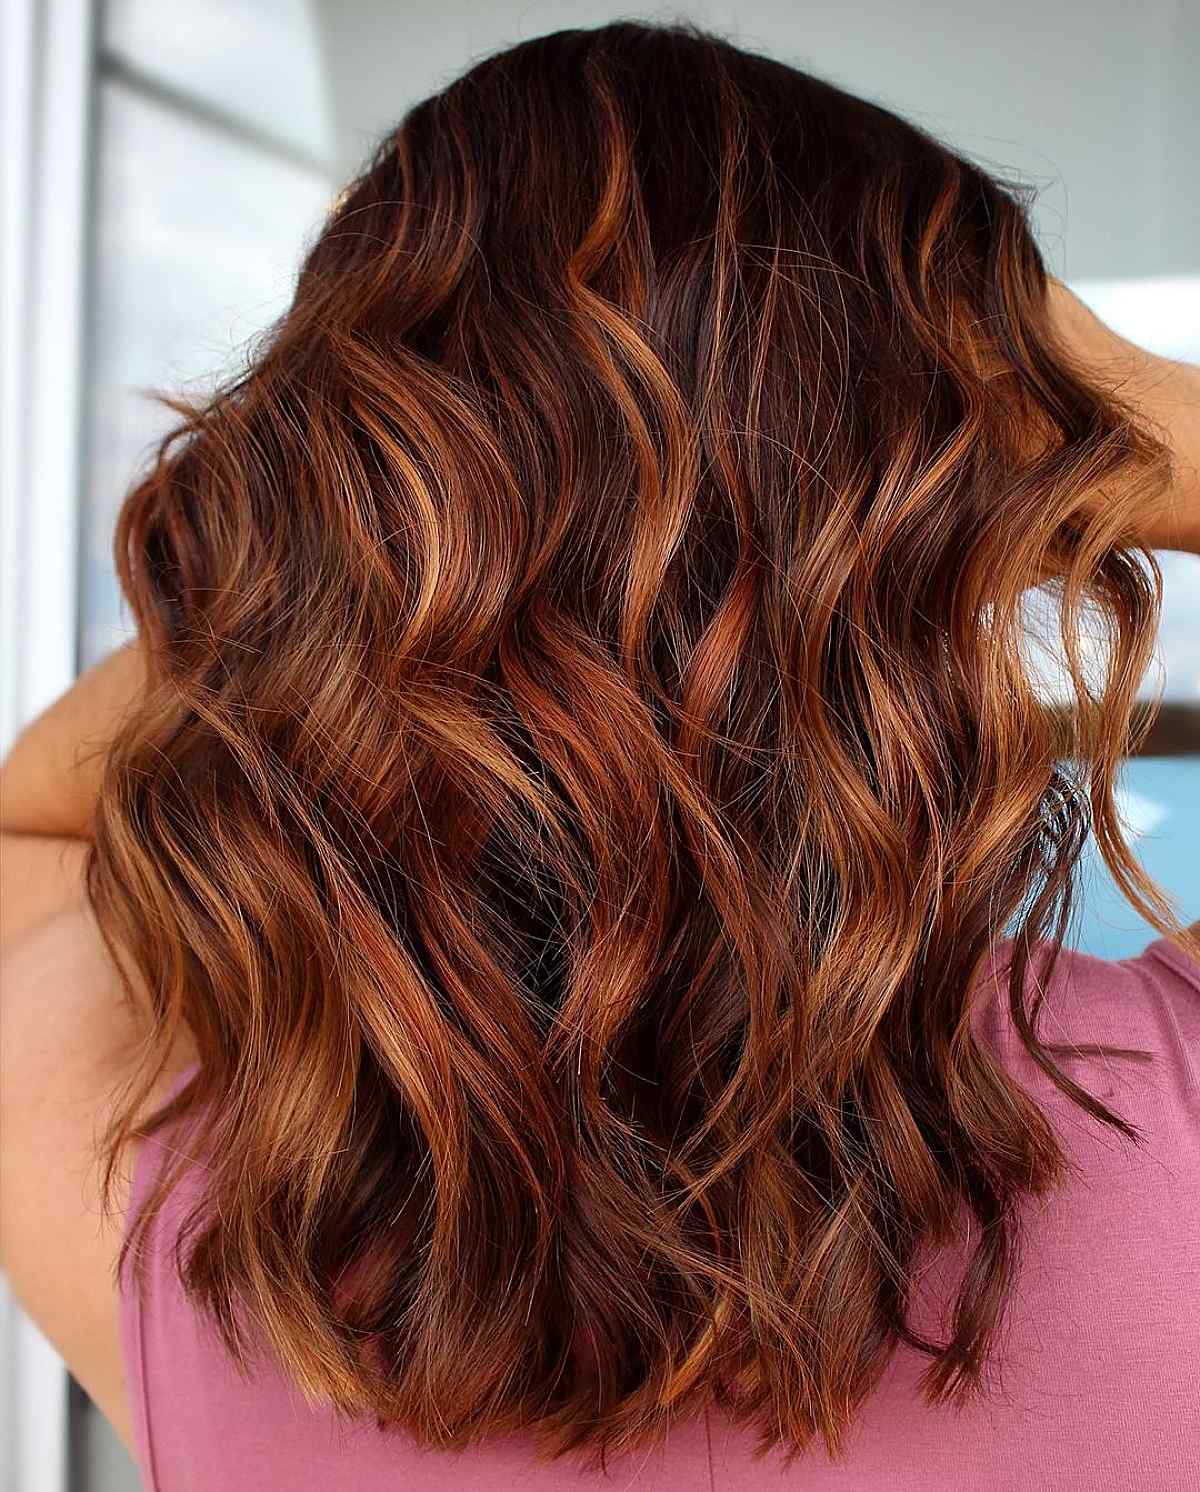 Top 10 Fall Hair Colors of 2021, According to Colorists this Autumn